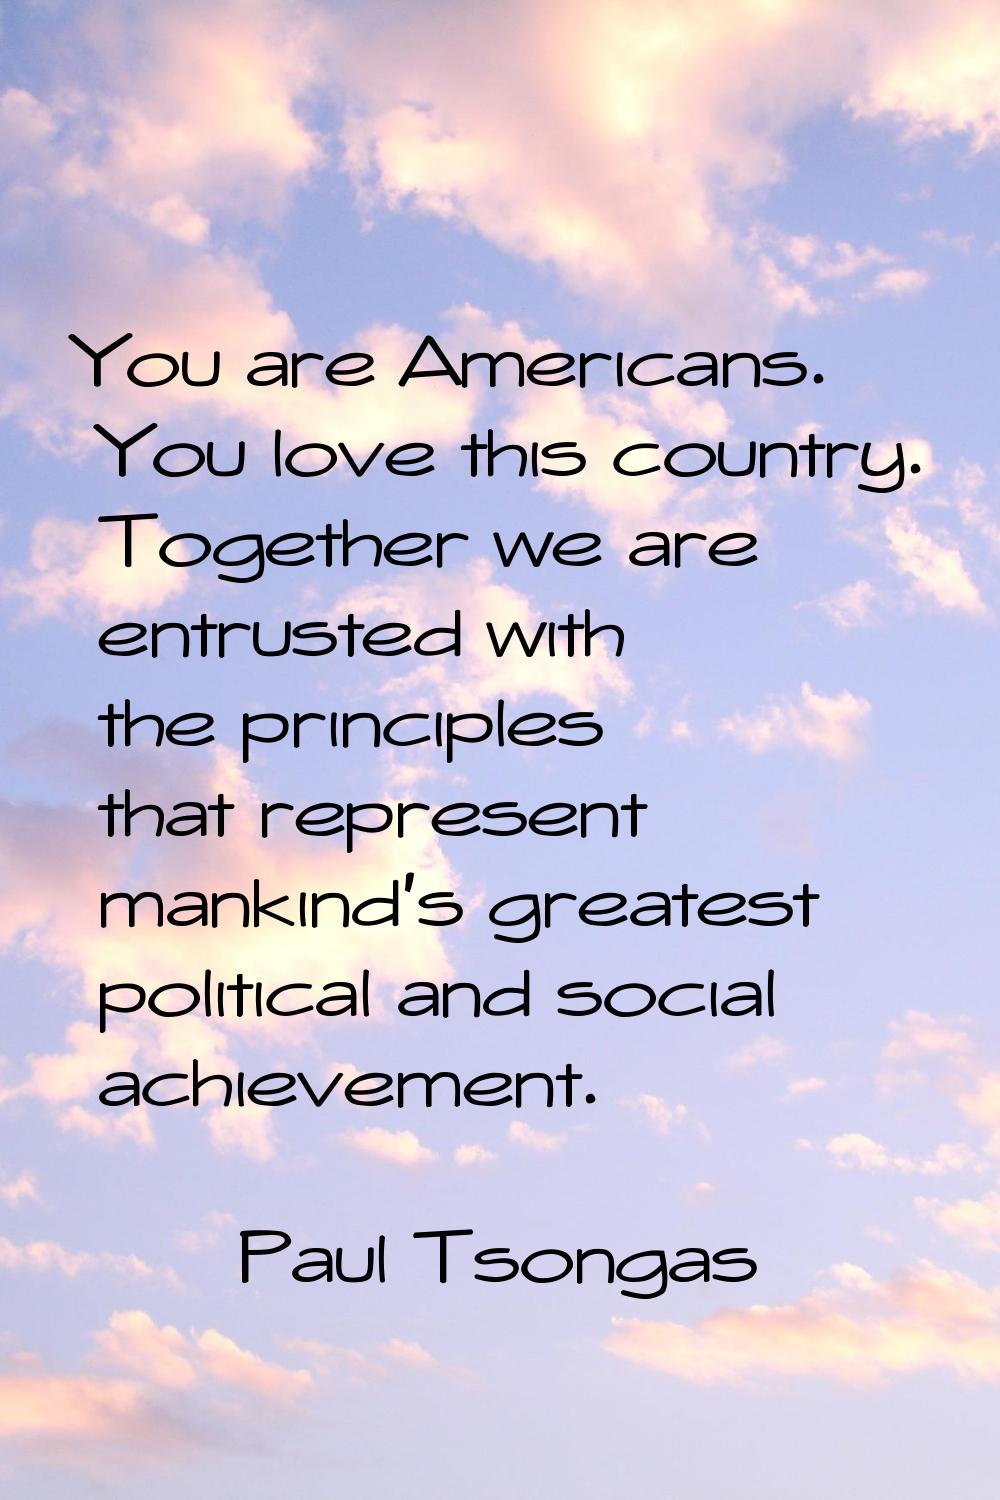 You are Americans. You love this country. Together we are entrusted with the principles that repres